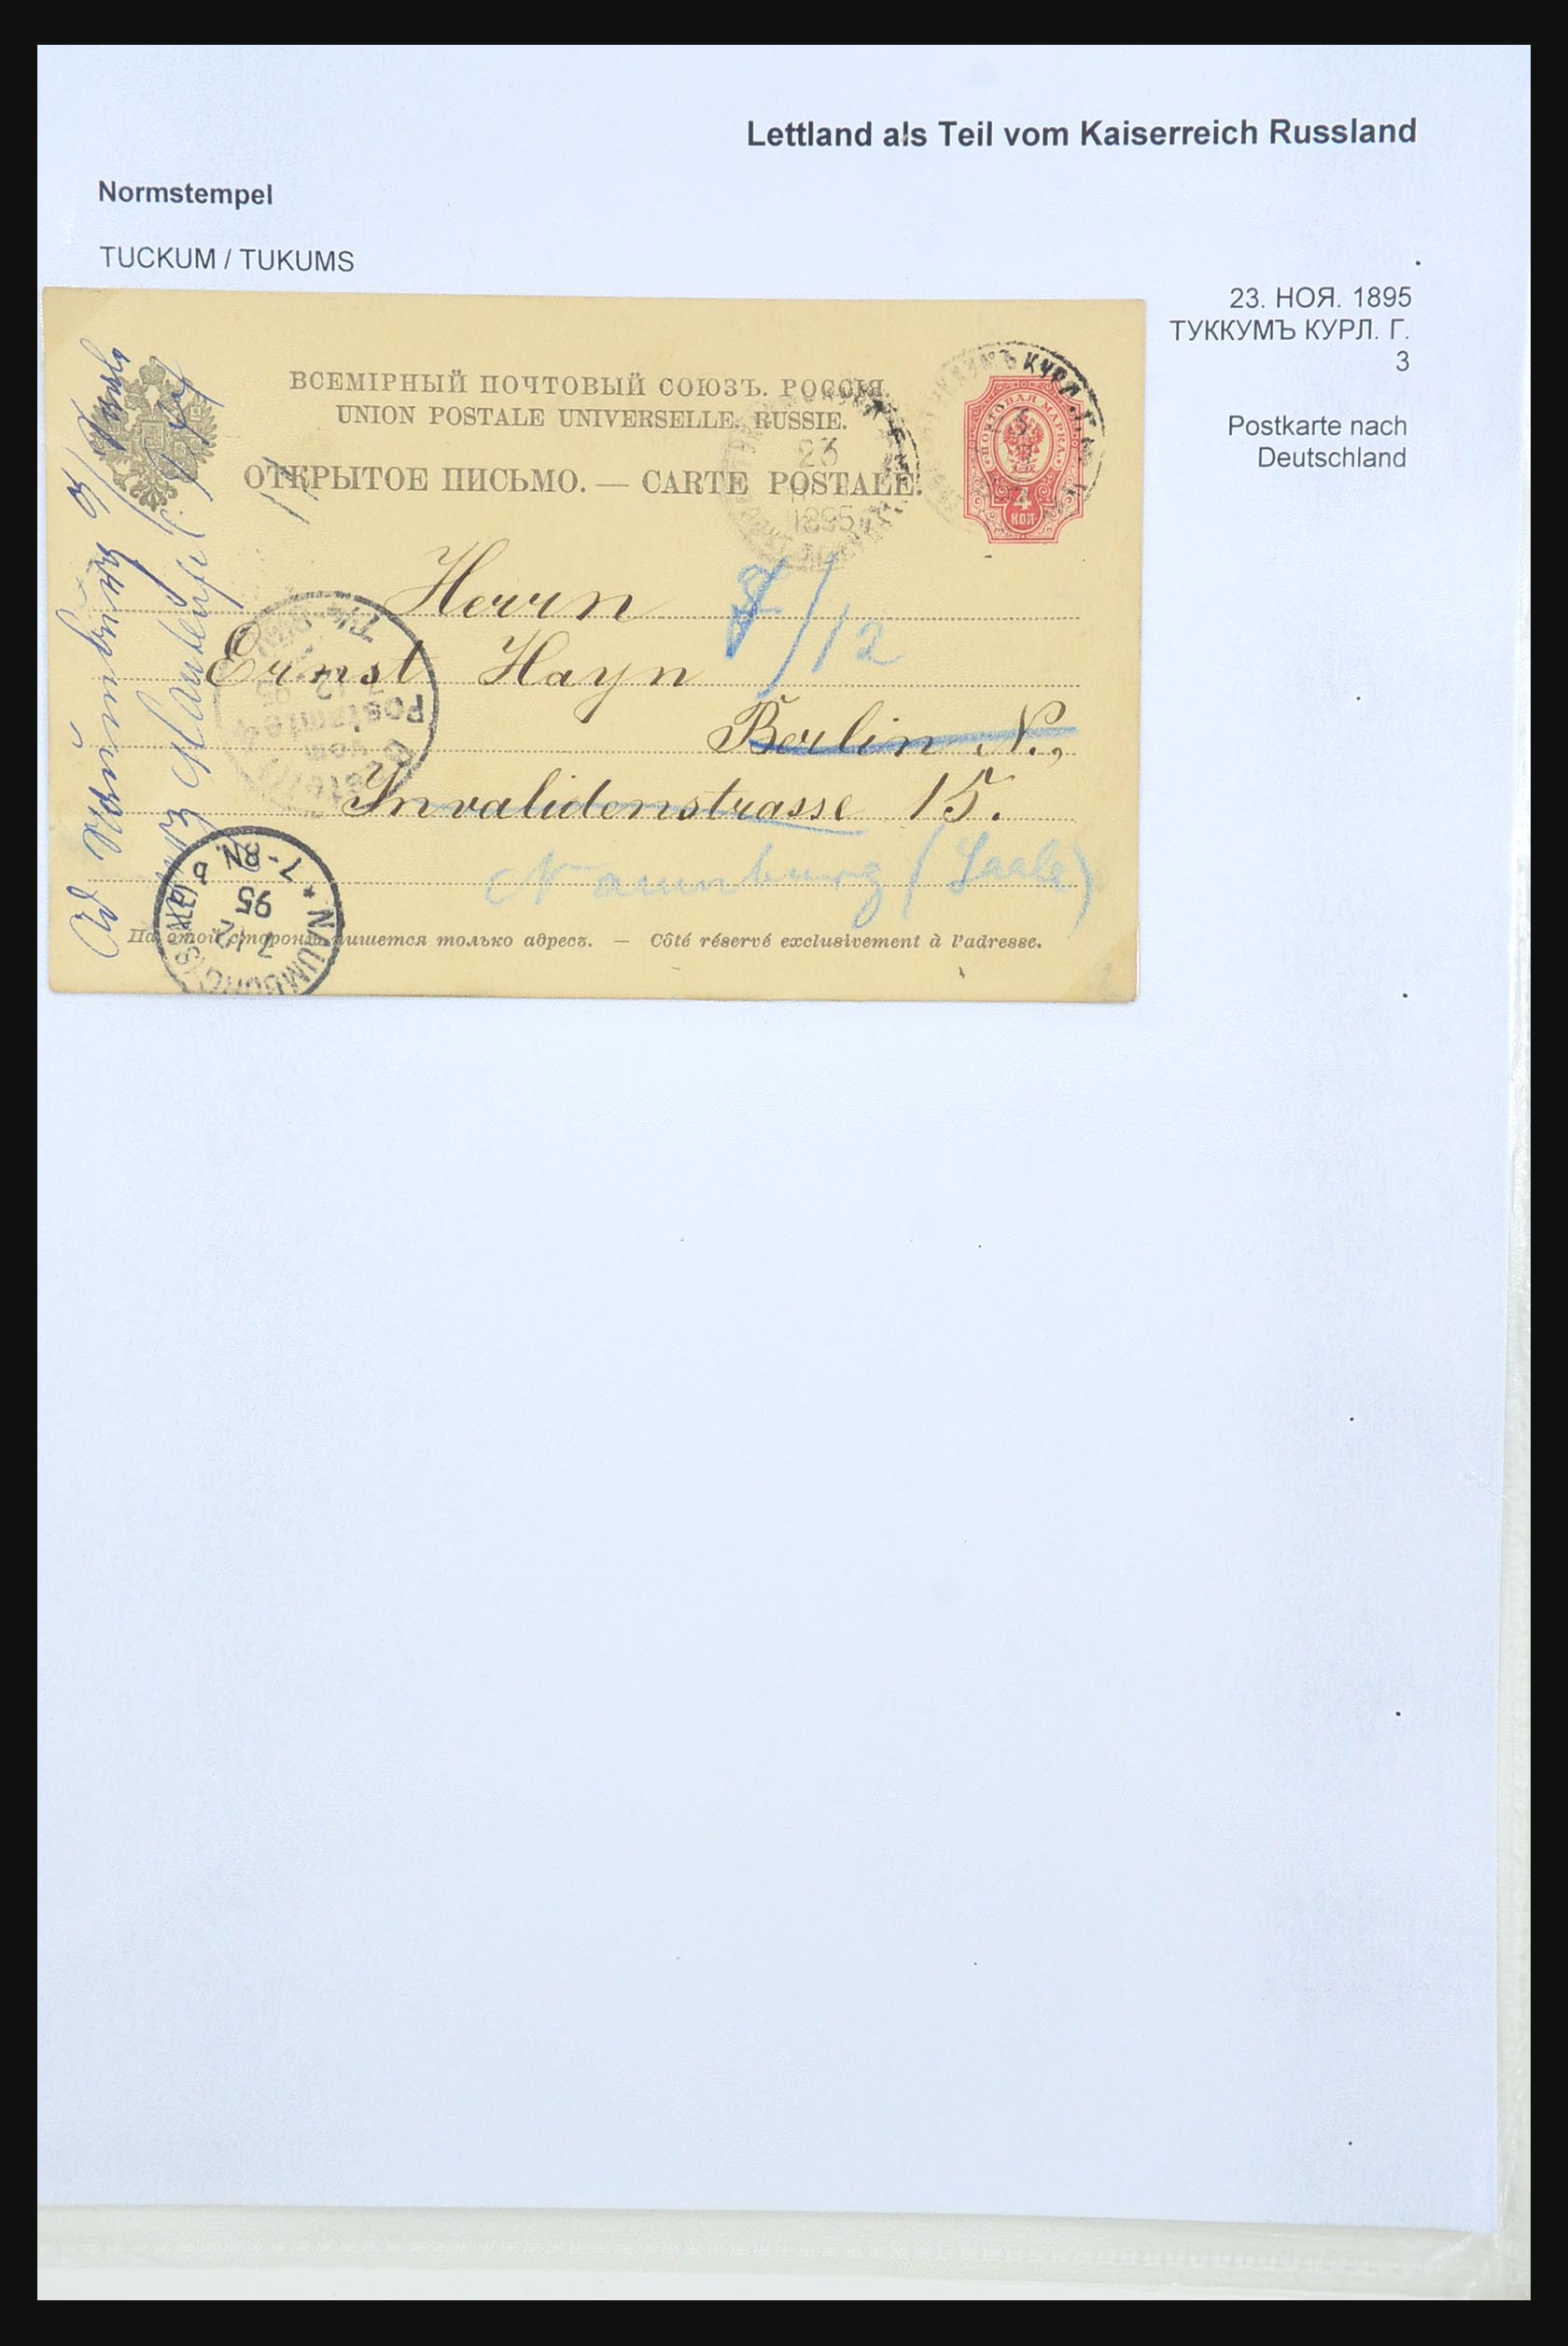 31305 108 - 31305 Latvia as part of Russia 1817-1918.